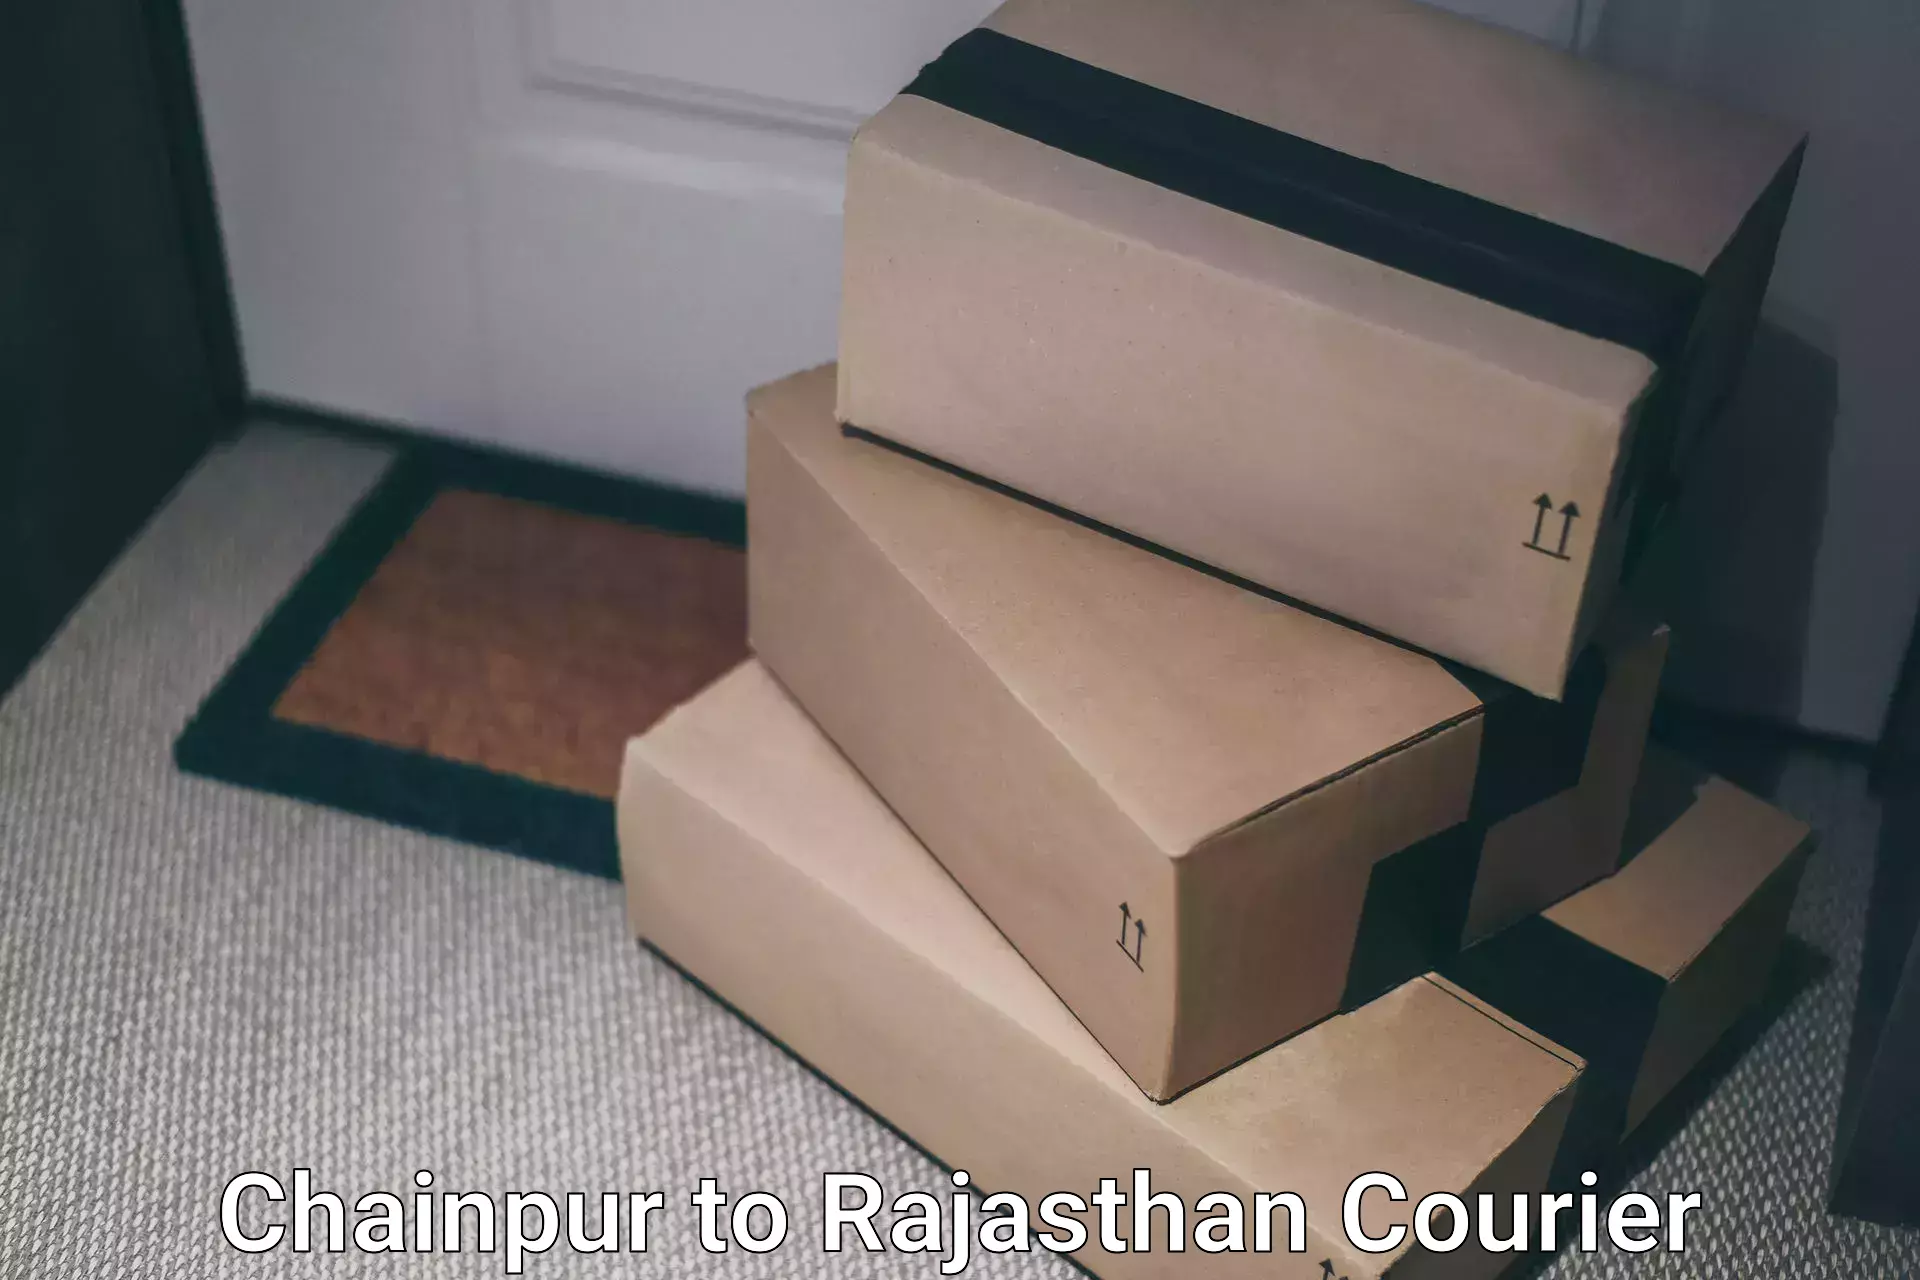 Multi-service courier options Chainpur to Pokhran